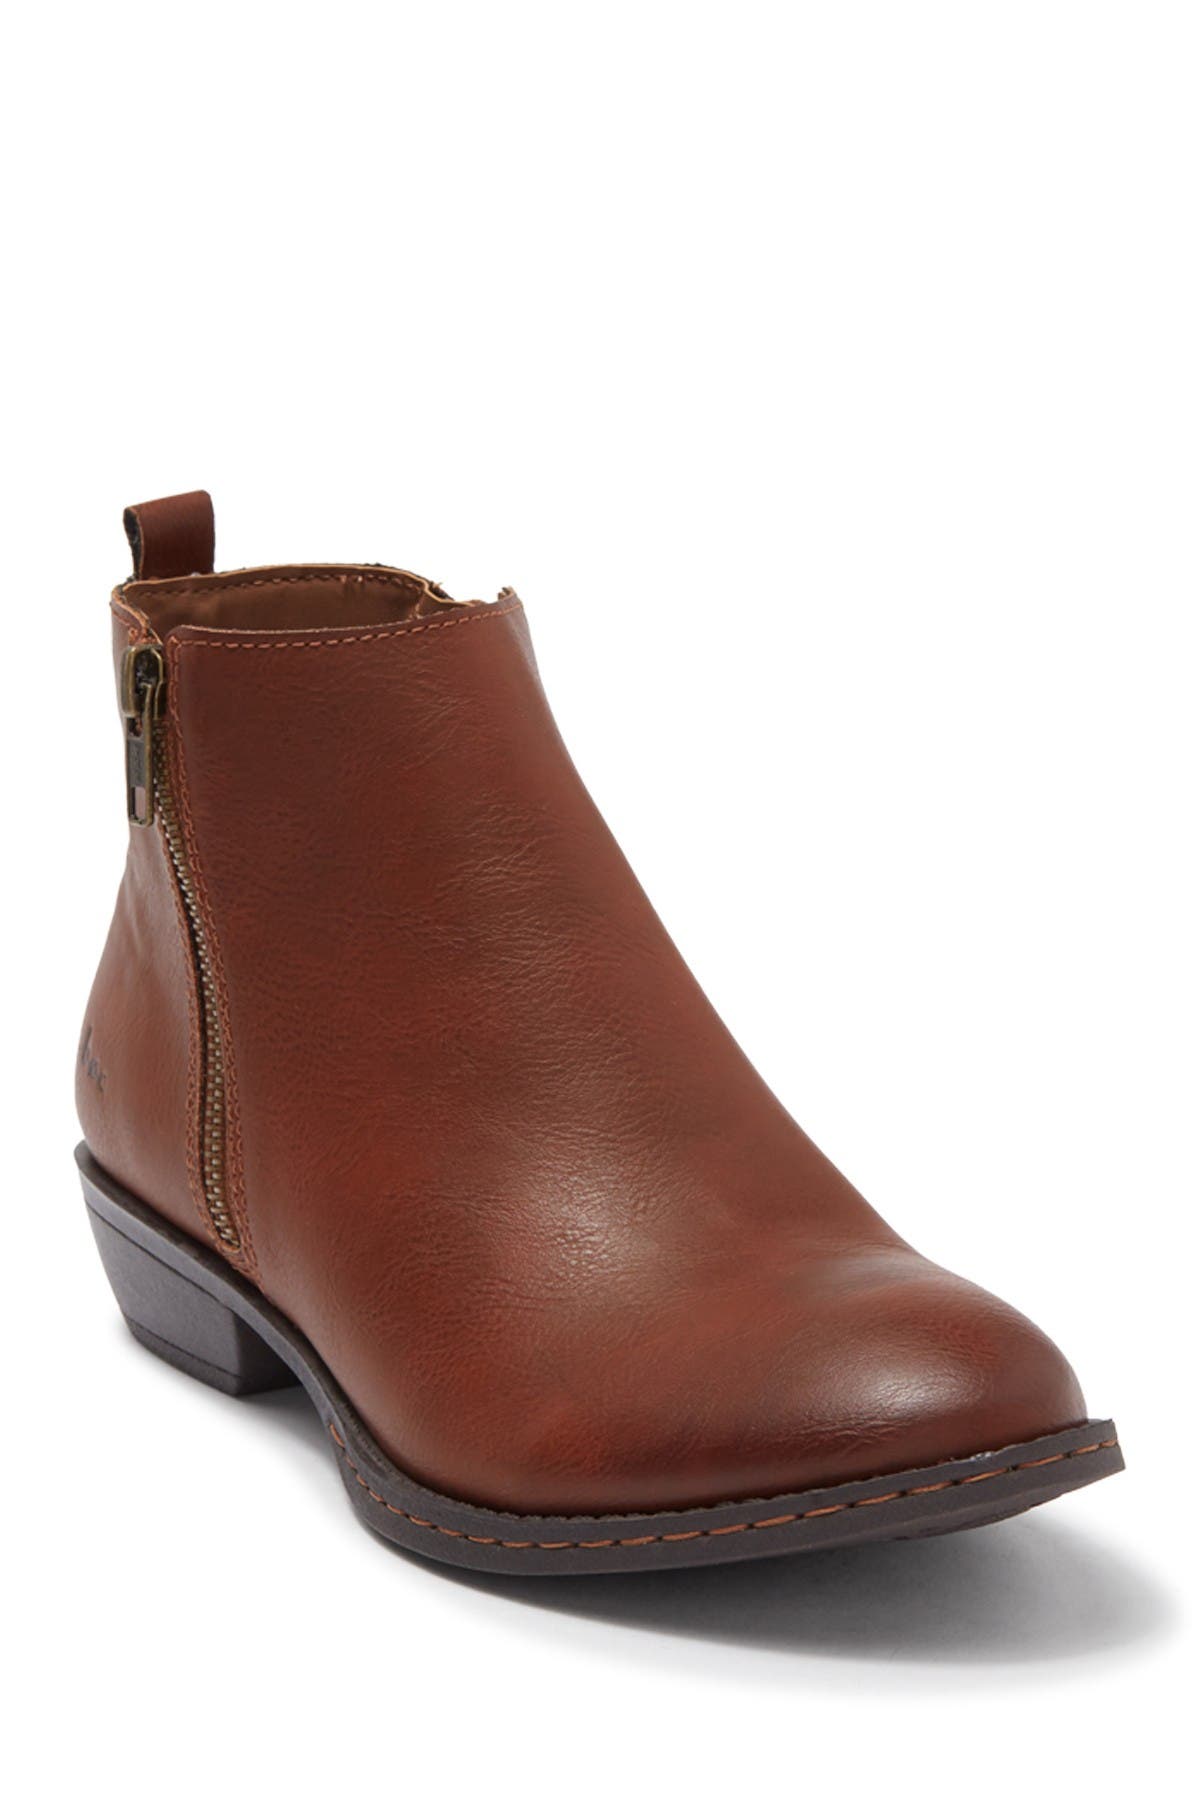 boc leather booties